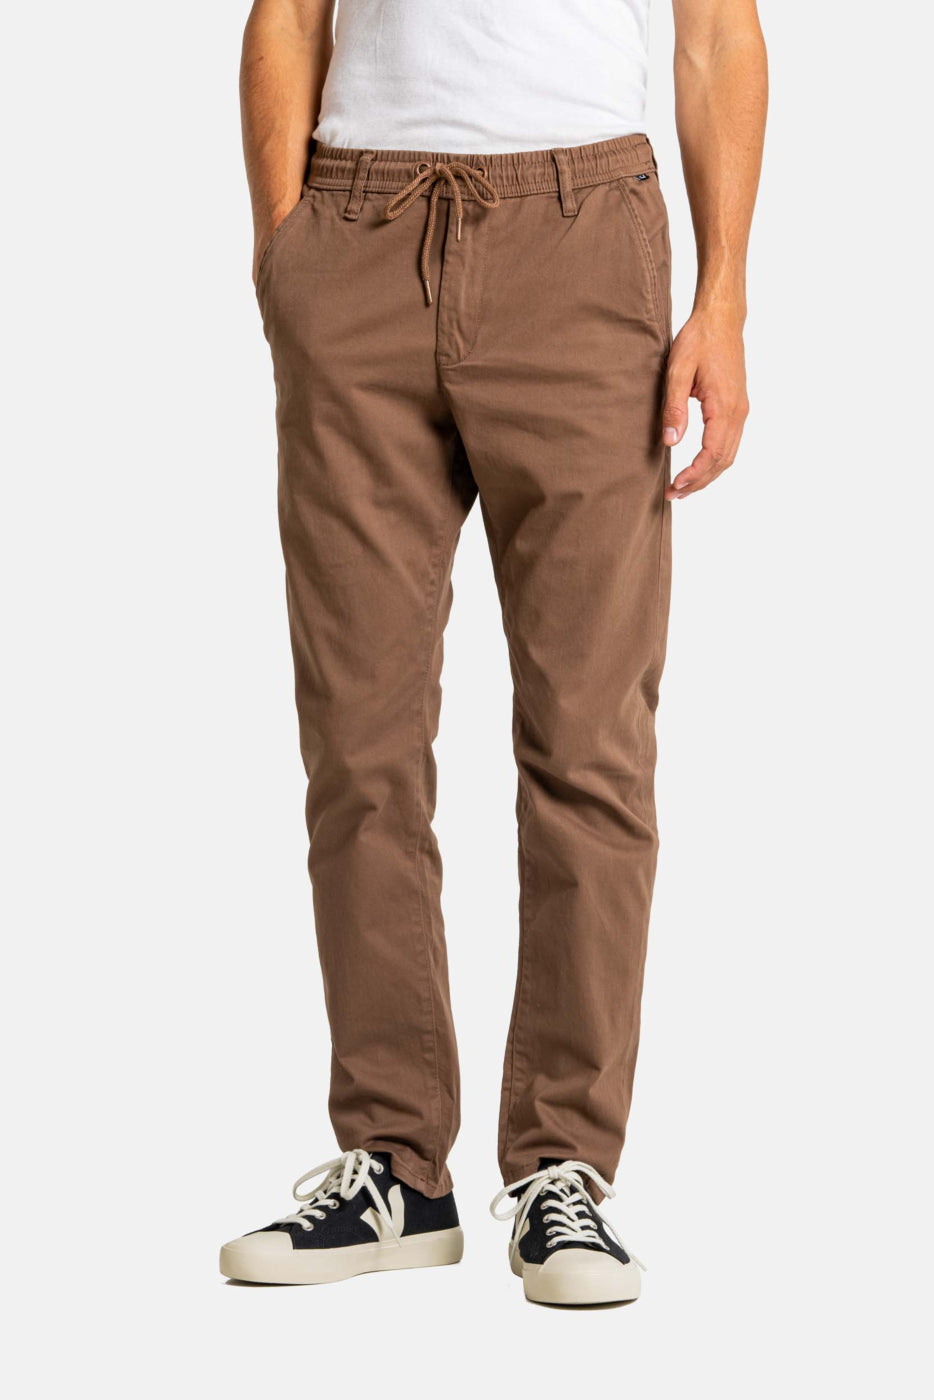 Reflex Easy ST Jogg-Chino-Pant brown